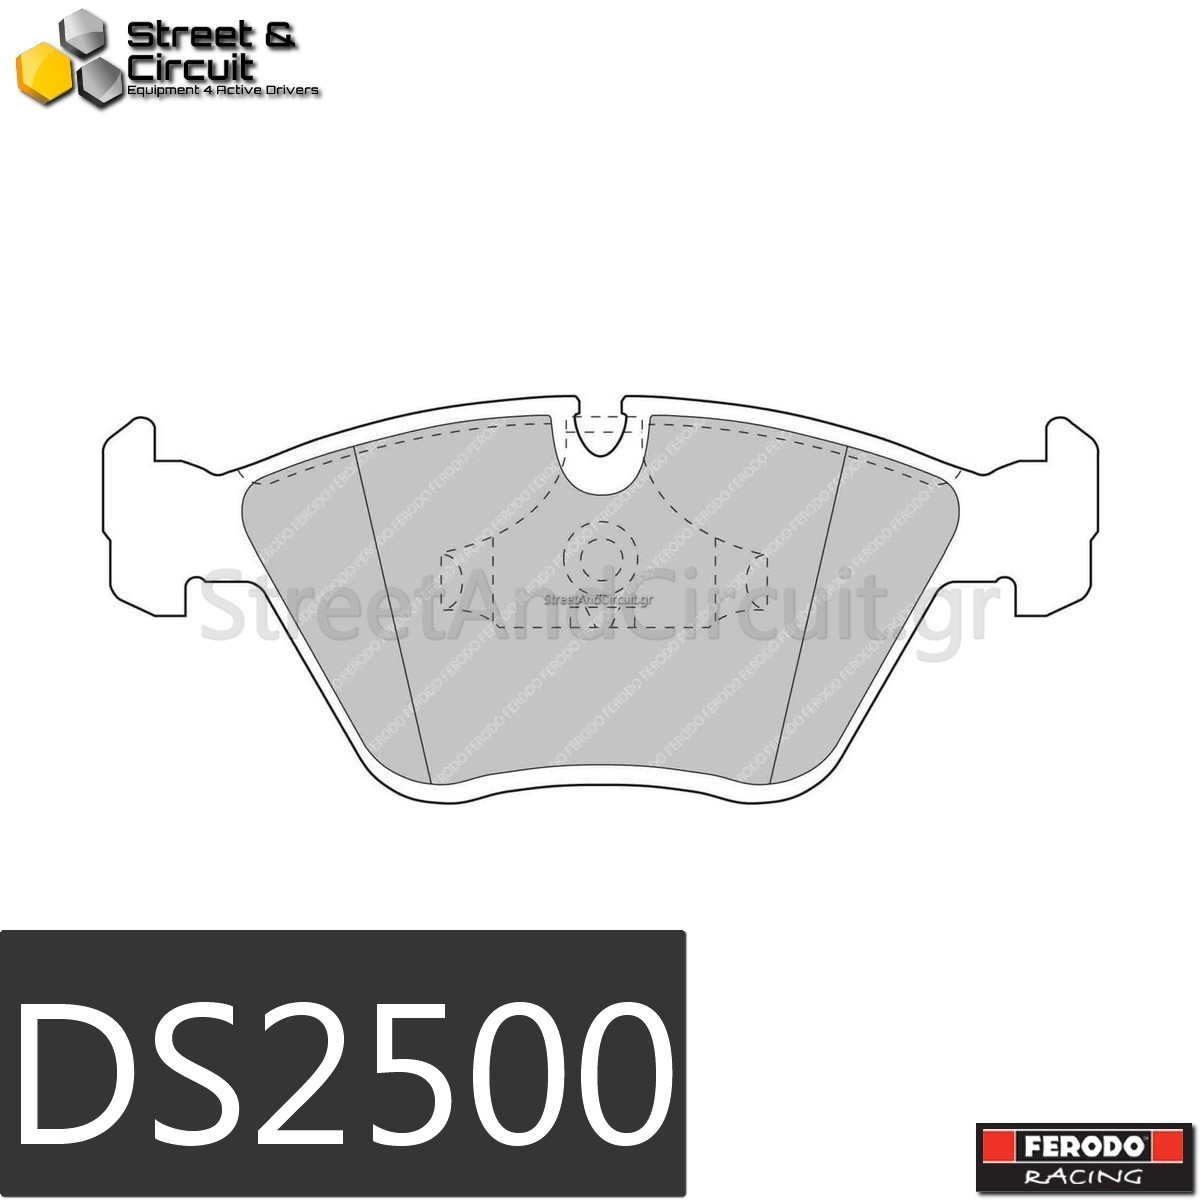 3.0 E36 3/C 24V M3 1990-1998 (FRONT), Brake System: ATE - Ferodo Racing Τακάκια *DS2500*